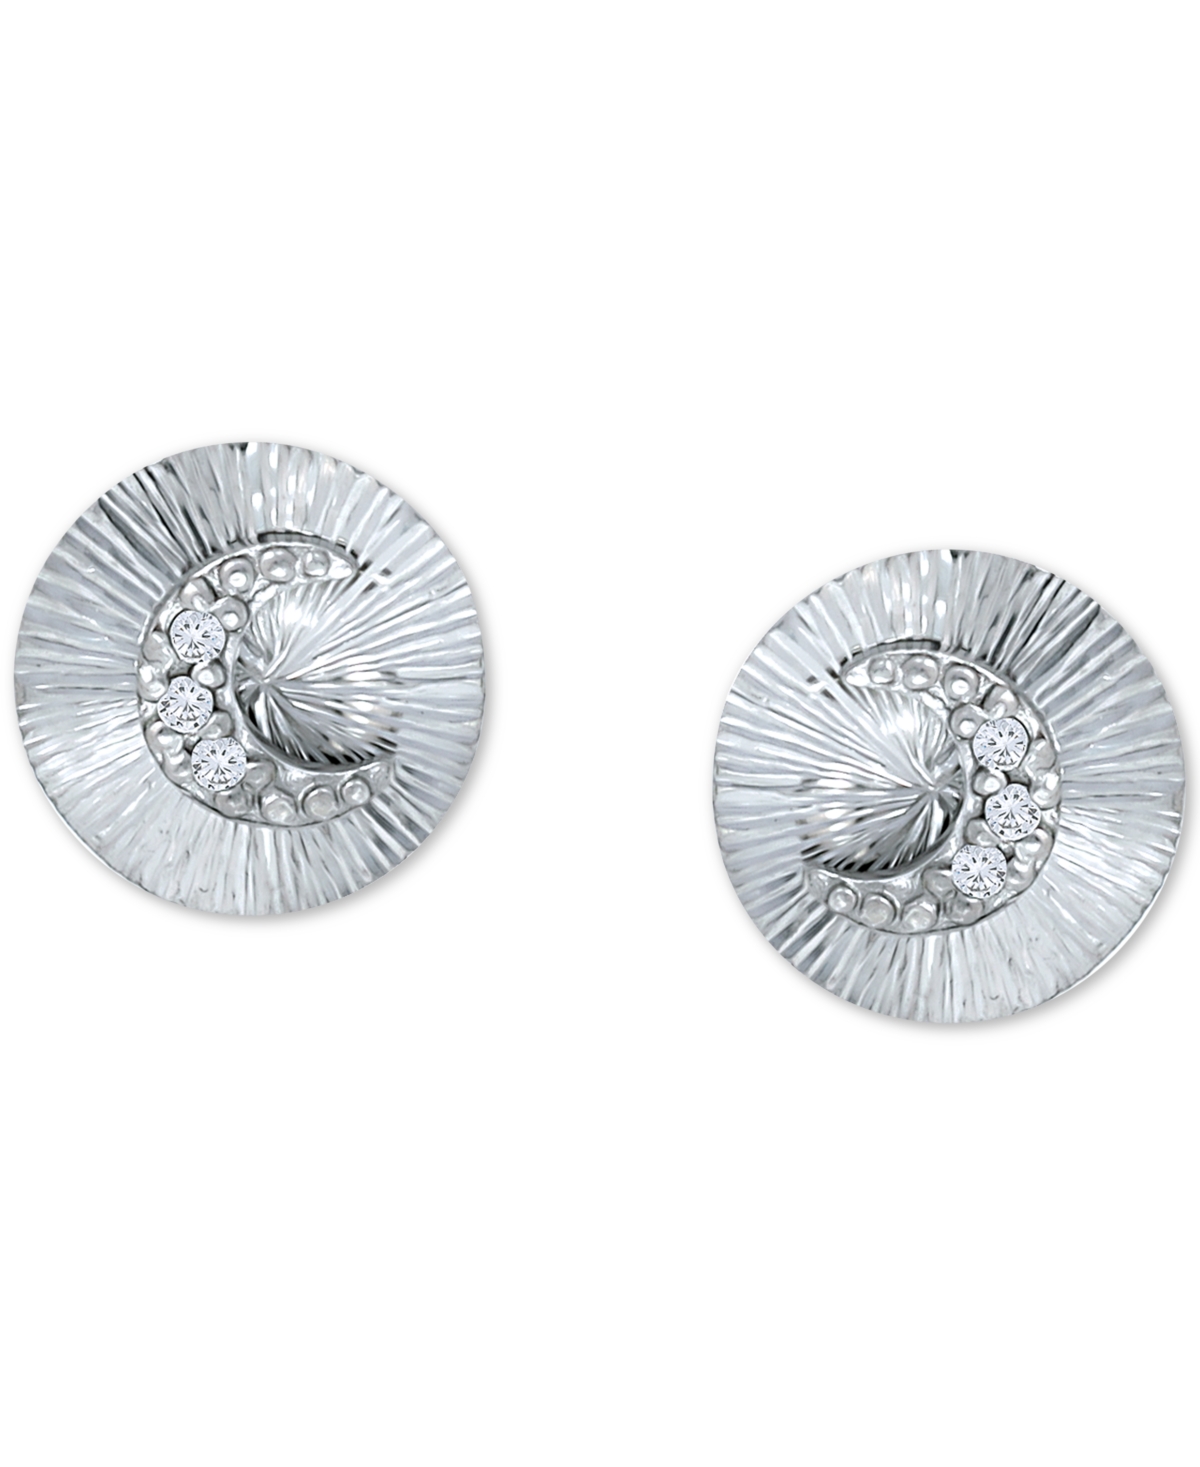 Cubic Zirconia Moon Disc Stud Earrings, Created for Macy's - Gold over Silver